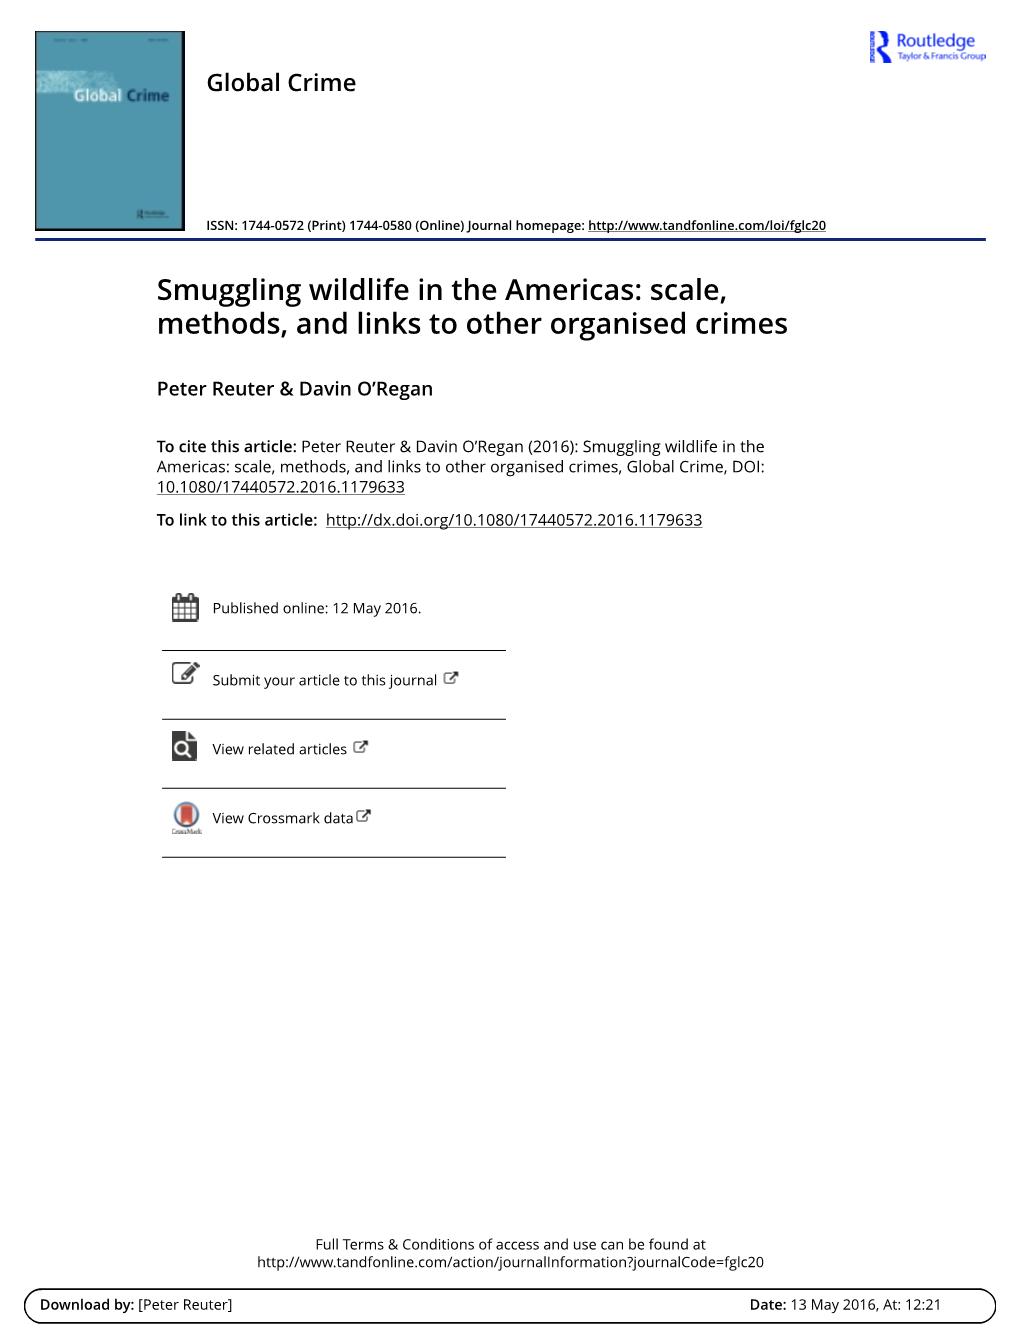 Smuggling Wildlife in the Americas: Scale, Methods, and Links to Other Organised Crimes